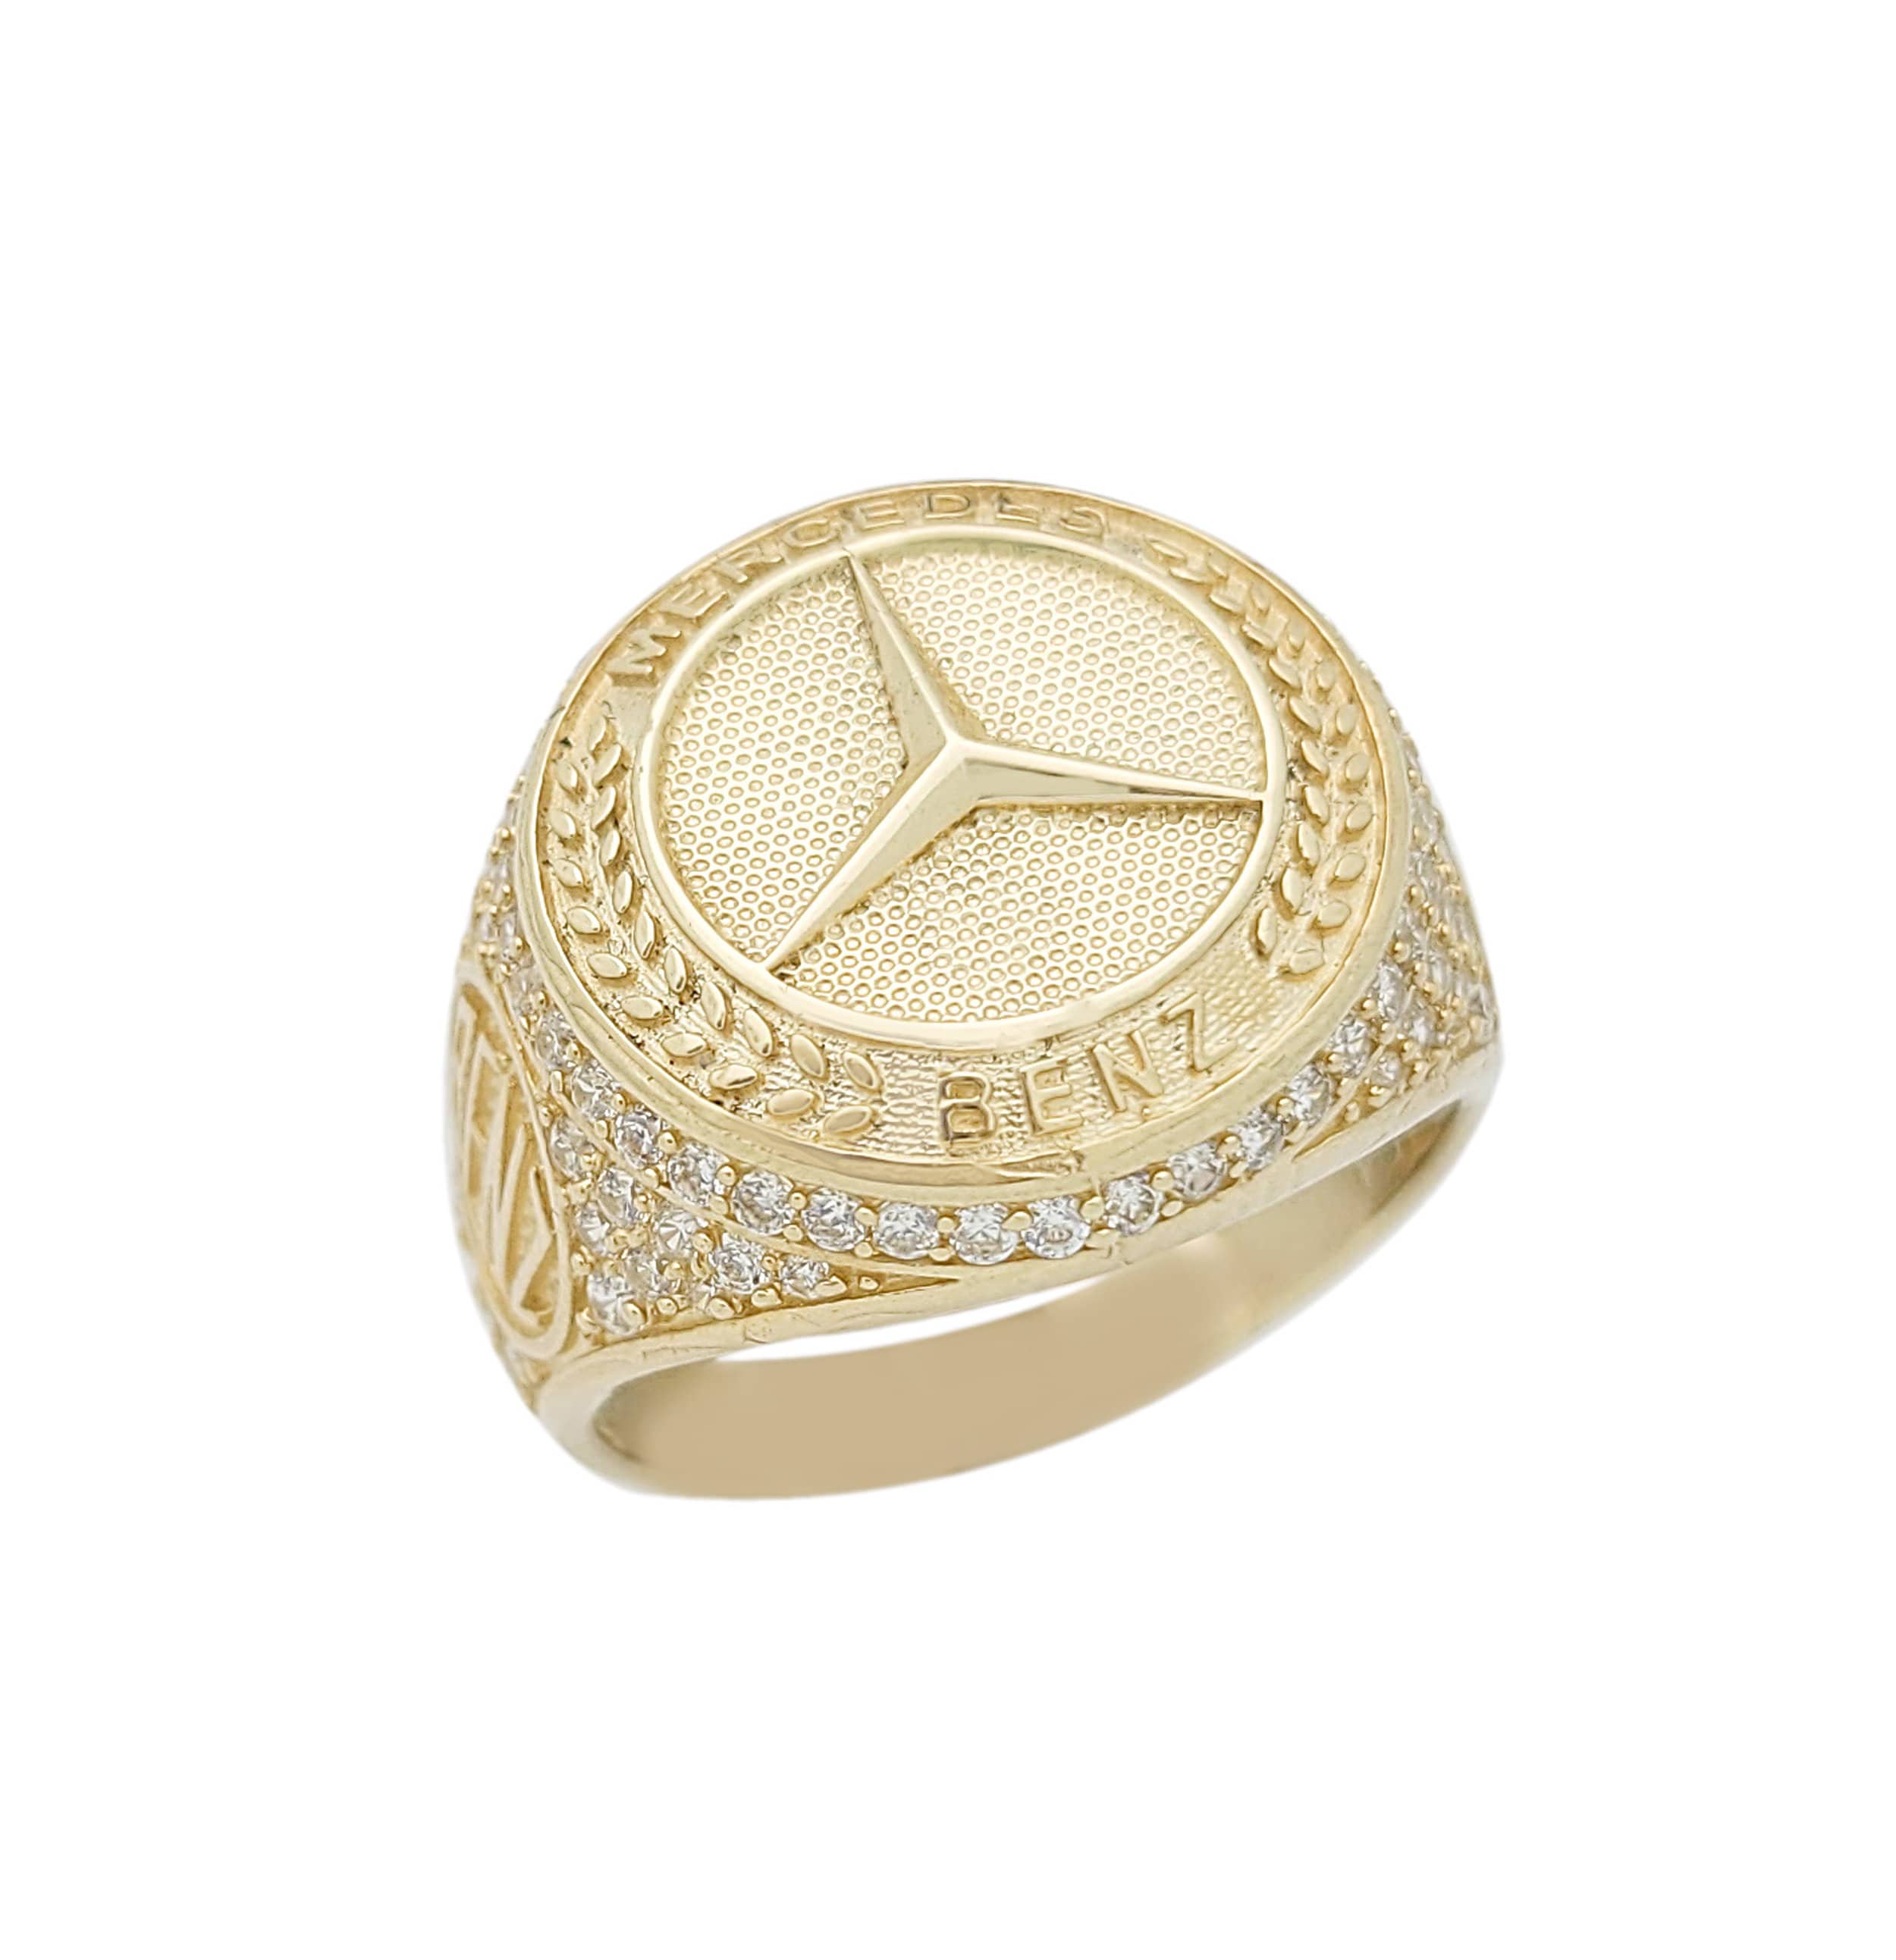 Buy quality Silver 92.5 Mercedes Design Gents Ring in Ahmedabad